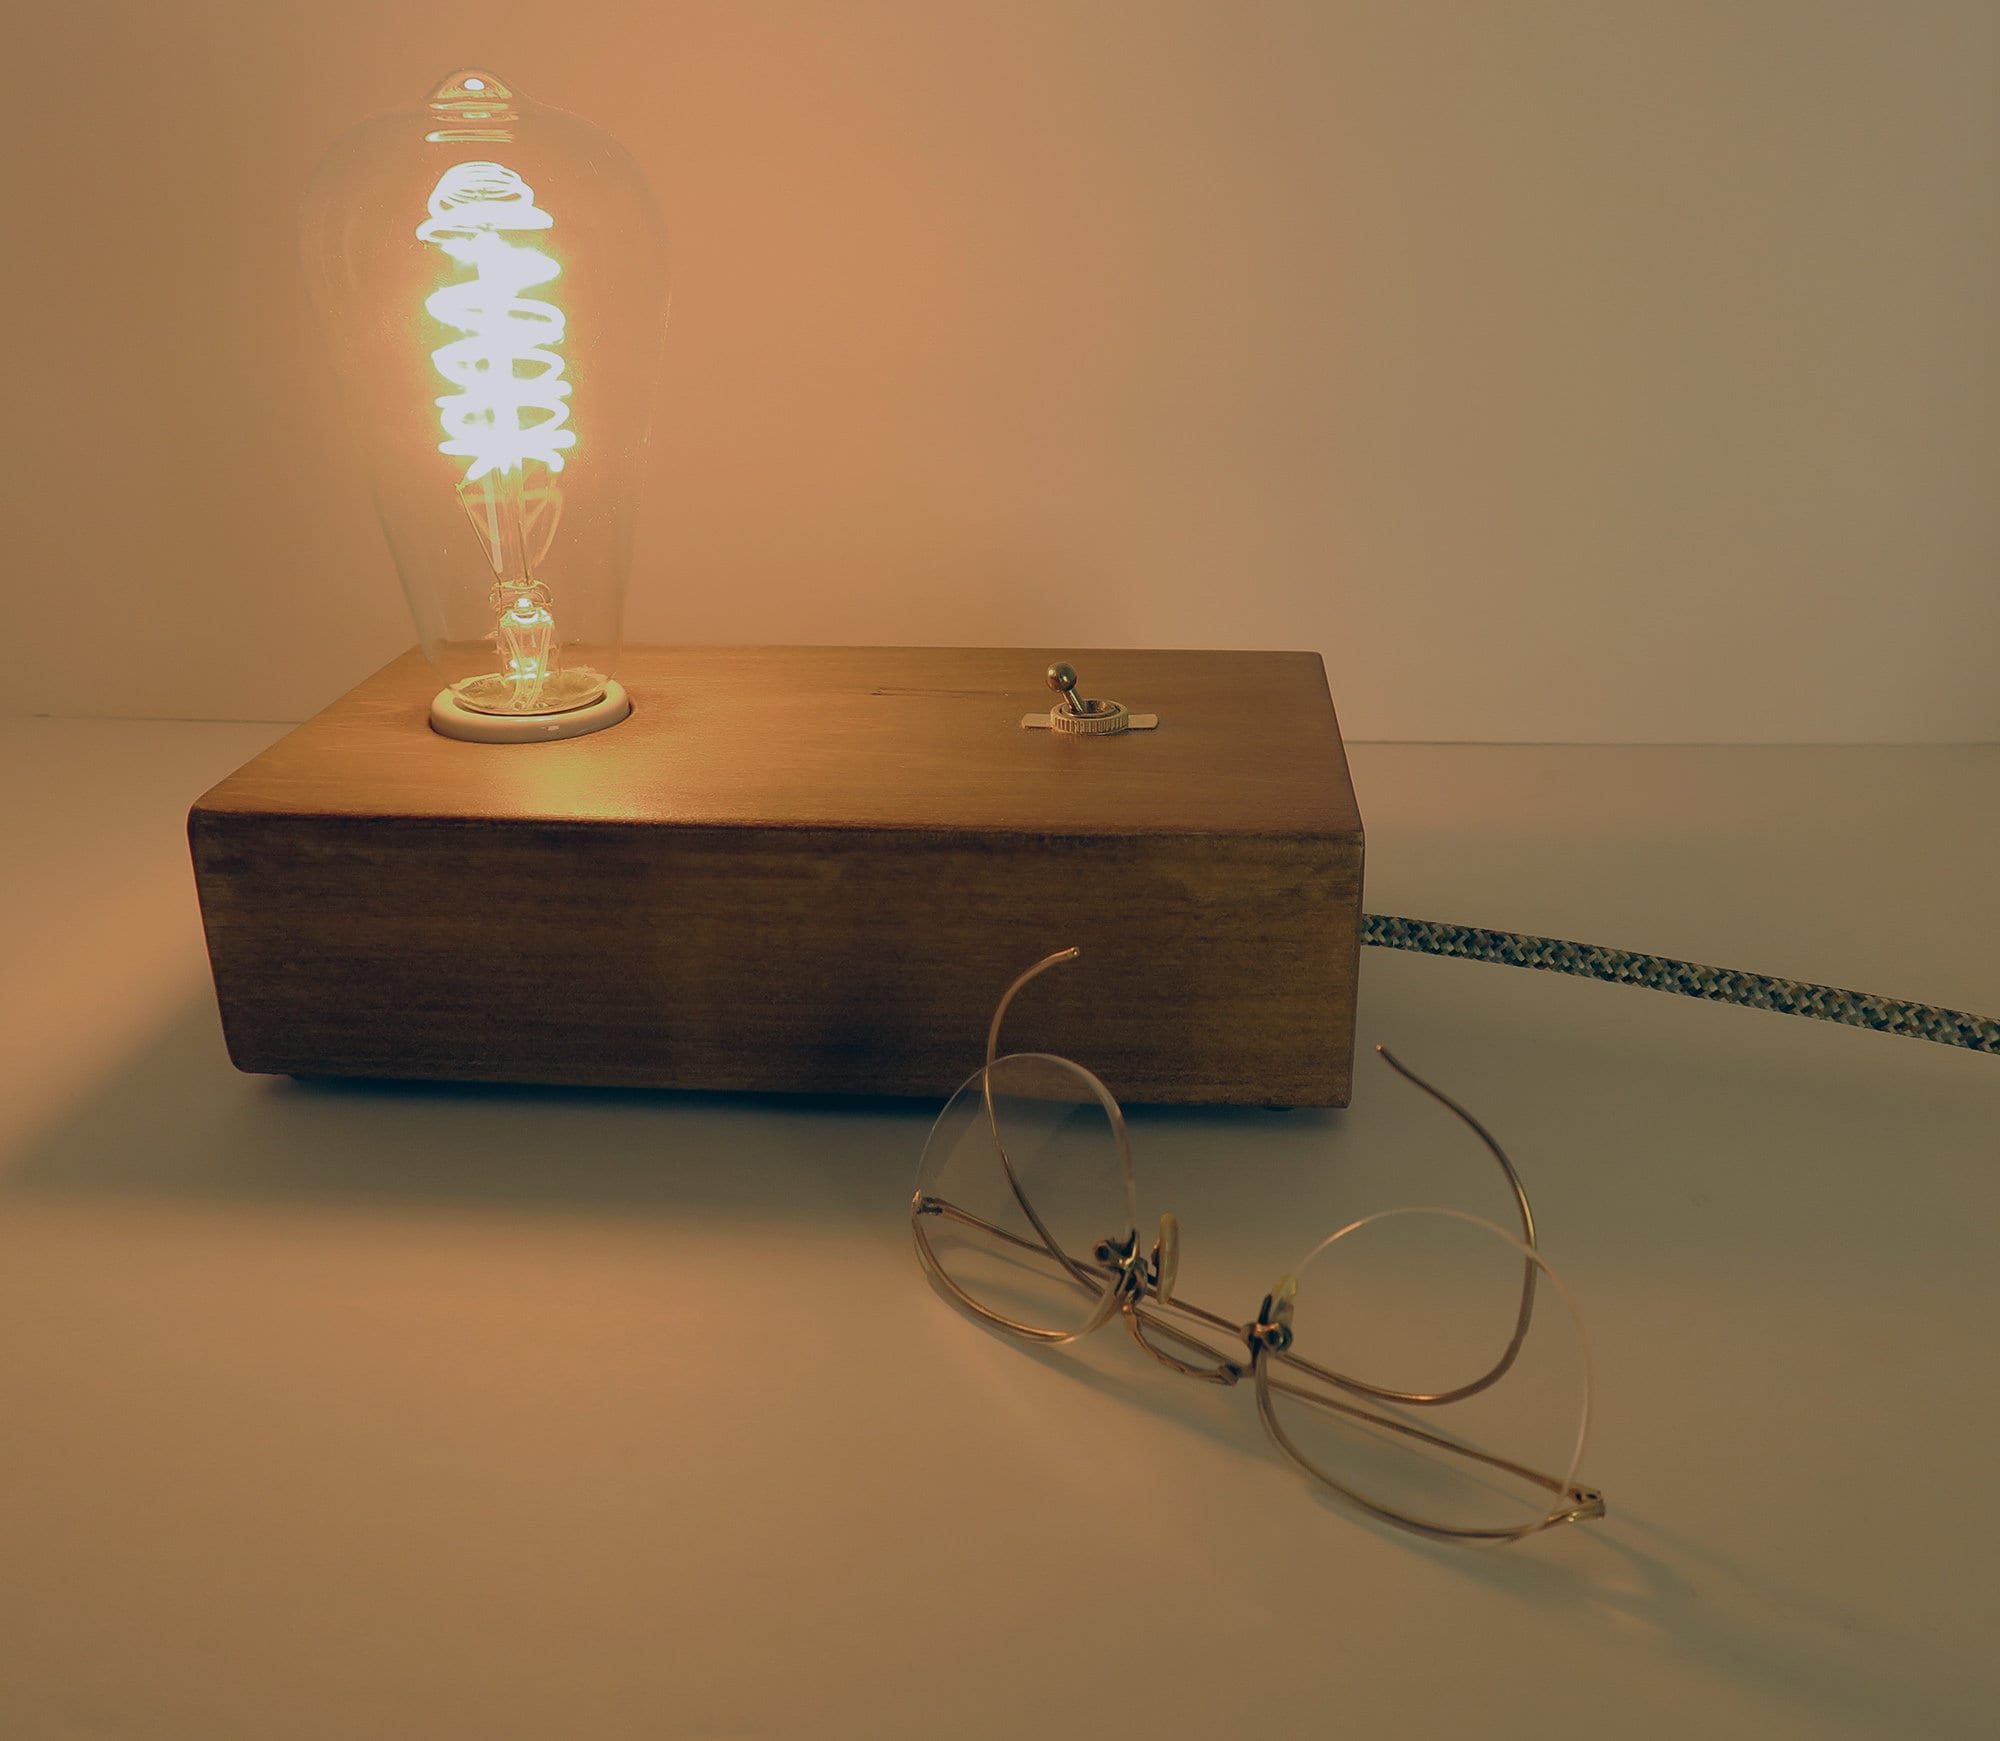 Personalized Gift for Dad, Edison Table Lamp, Wood Block Lamp Base with Edison Bulb, Industrial Décor, gift, unique